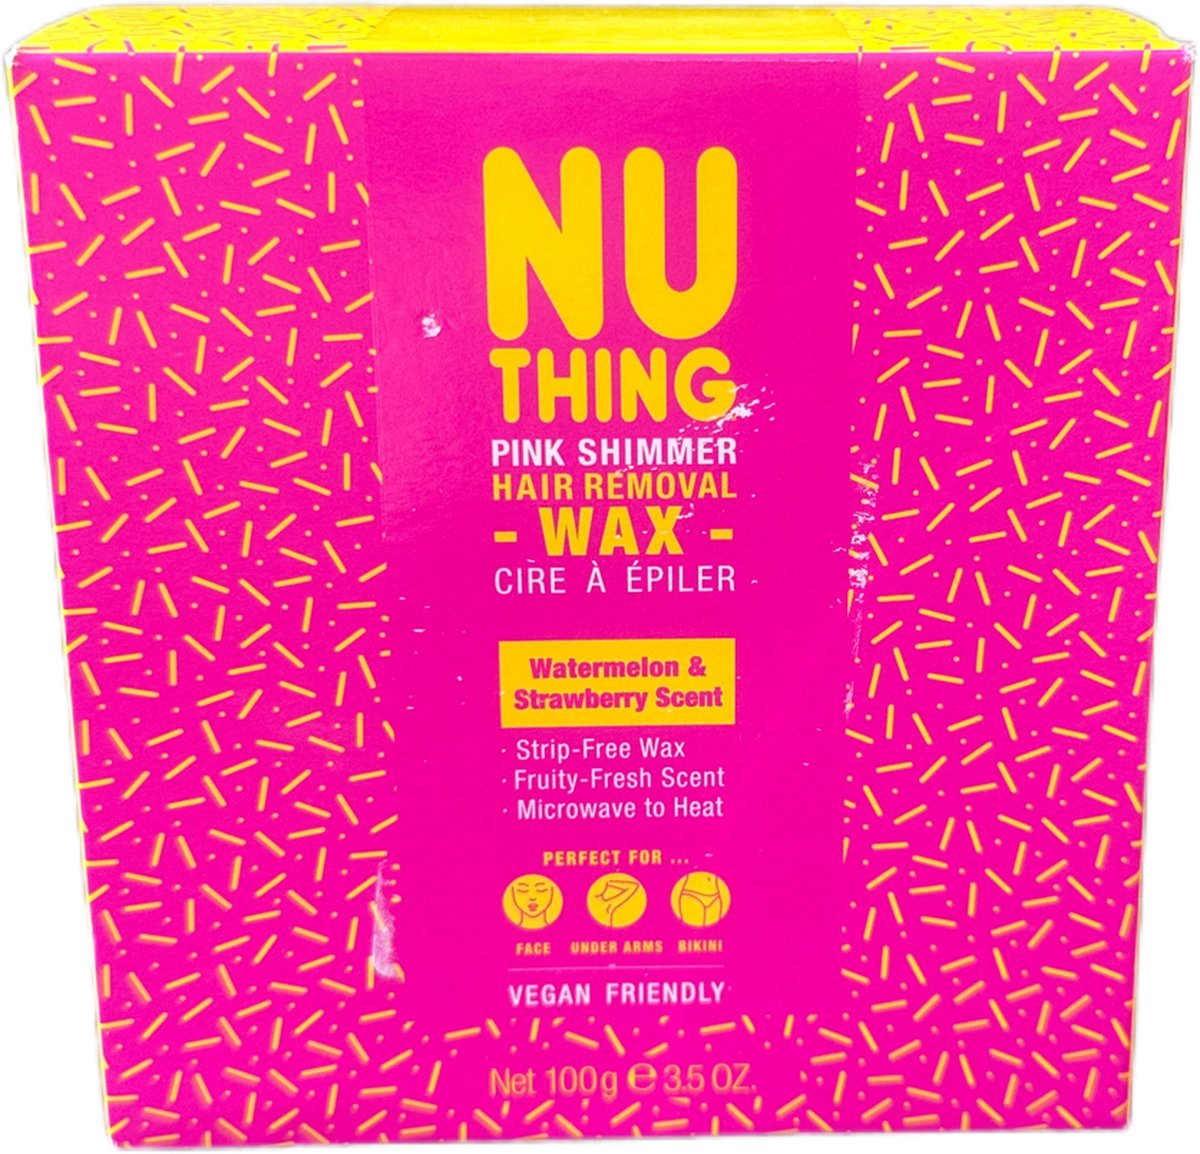 Nuthing wax Hair Removal Watermelon & Strawberry Scent